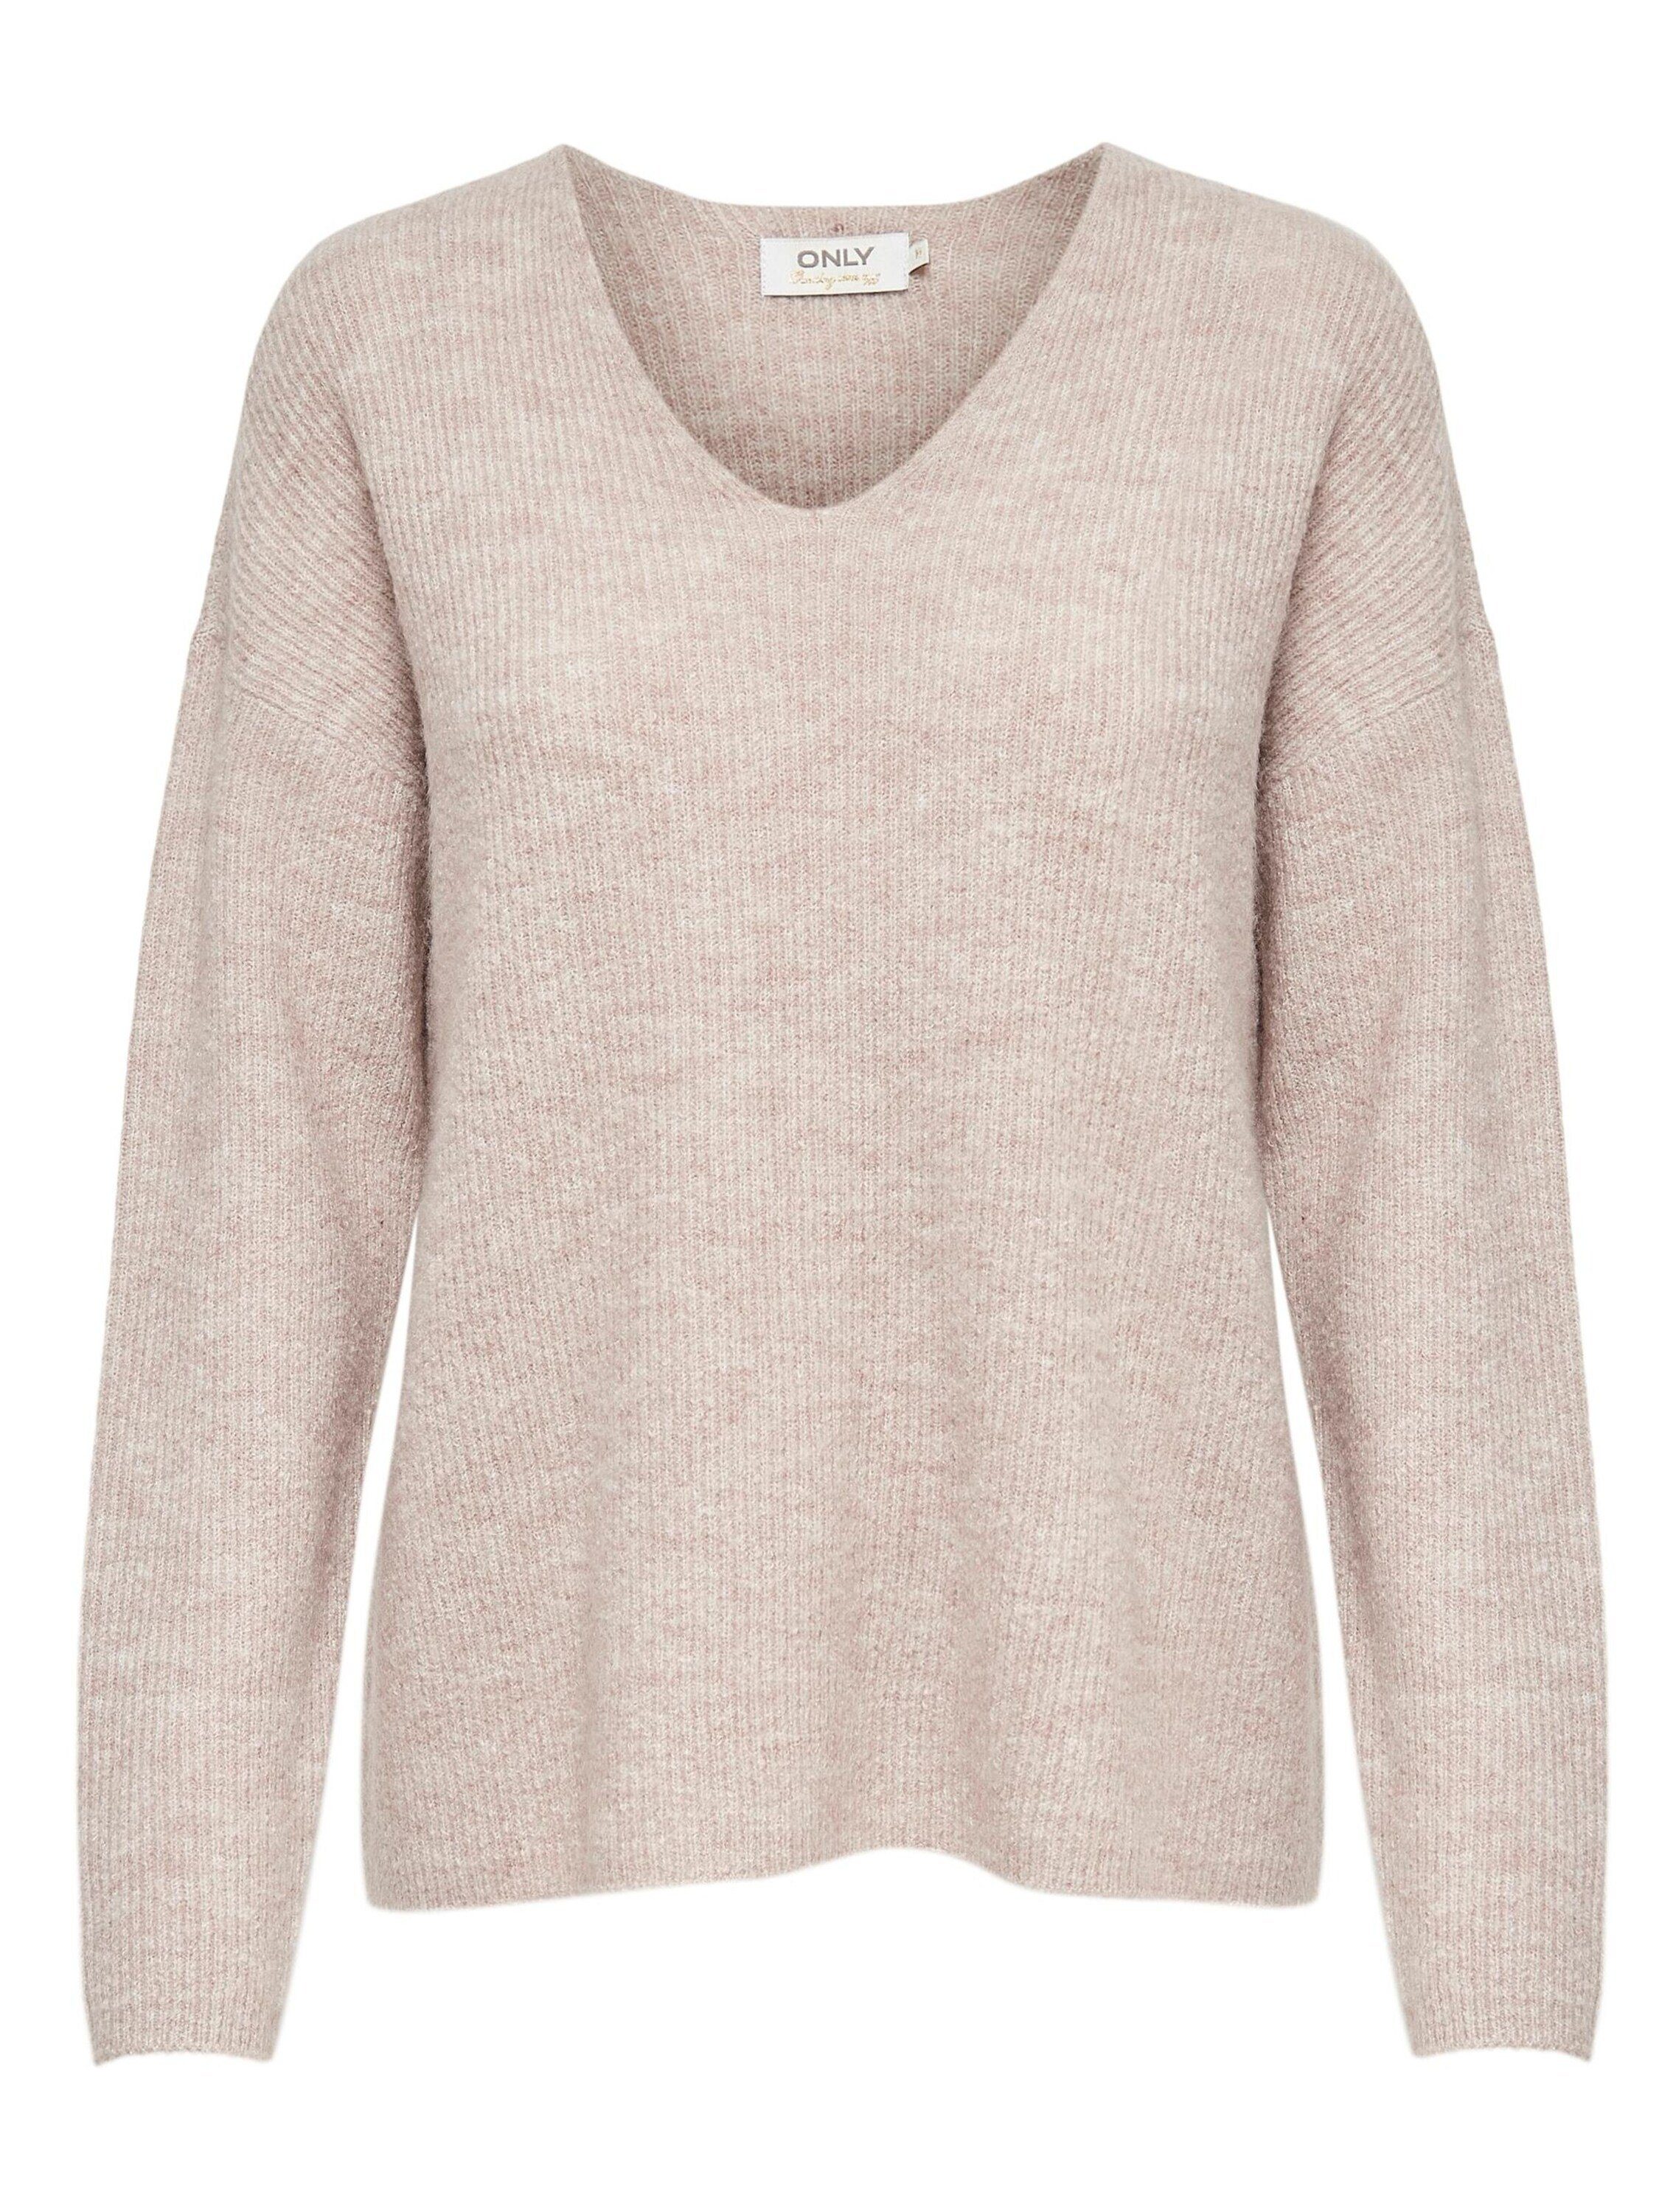 Details ONLY stone Camilla Plain/ohne pumice Strickpullover (1-tlg)